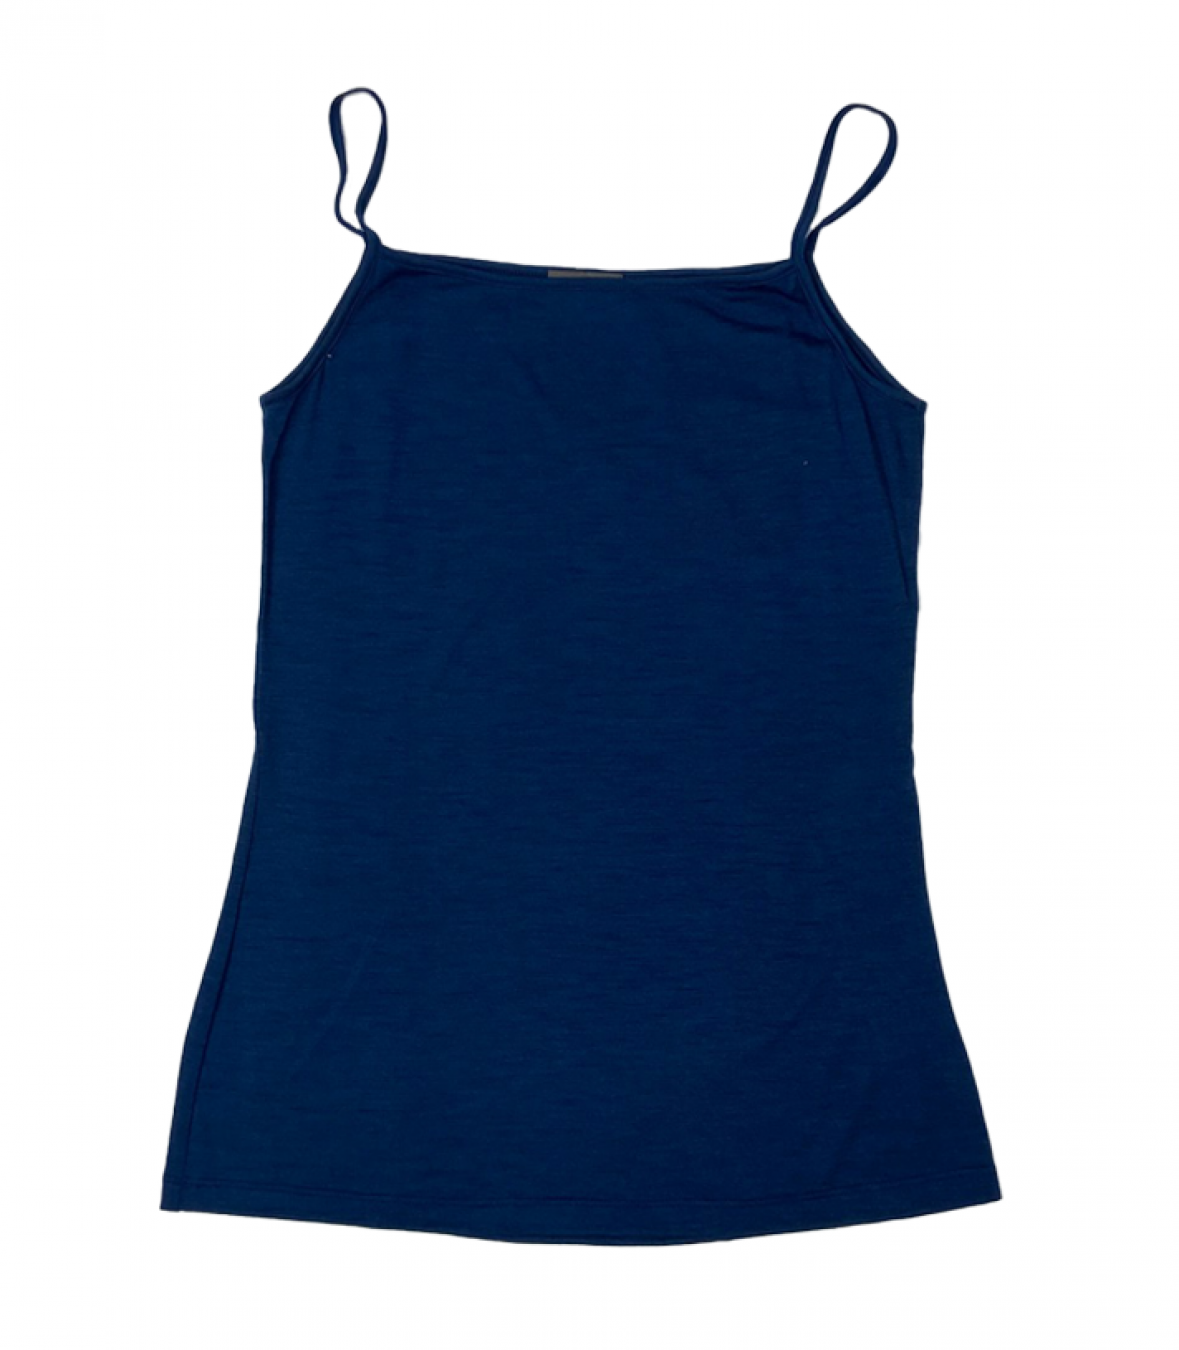 Best Organic Wool Camisole Made in USA